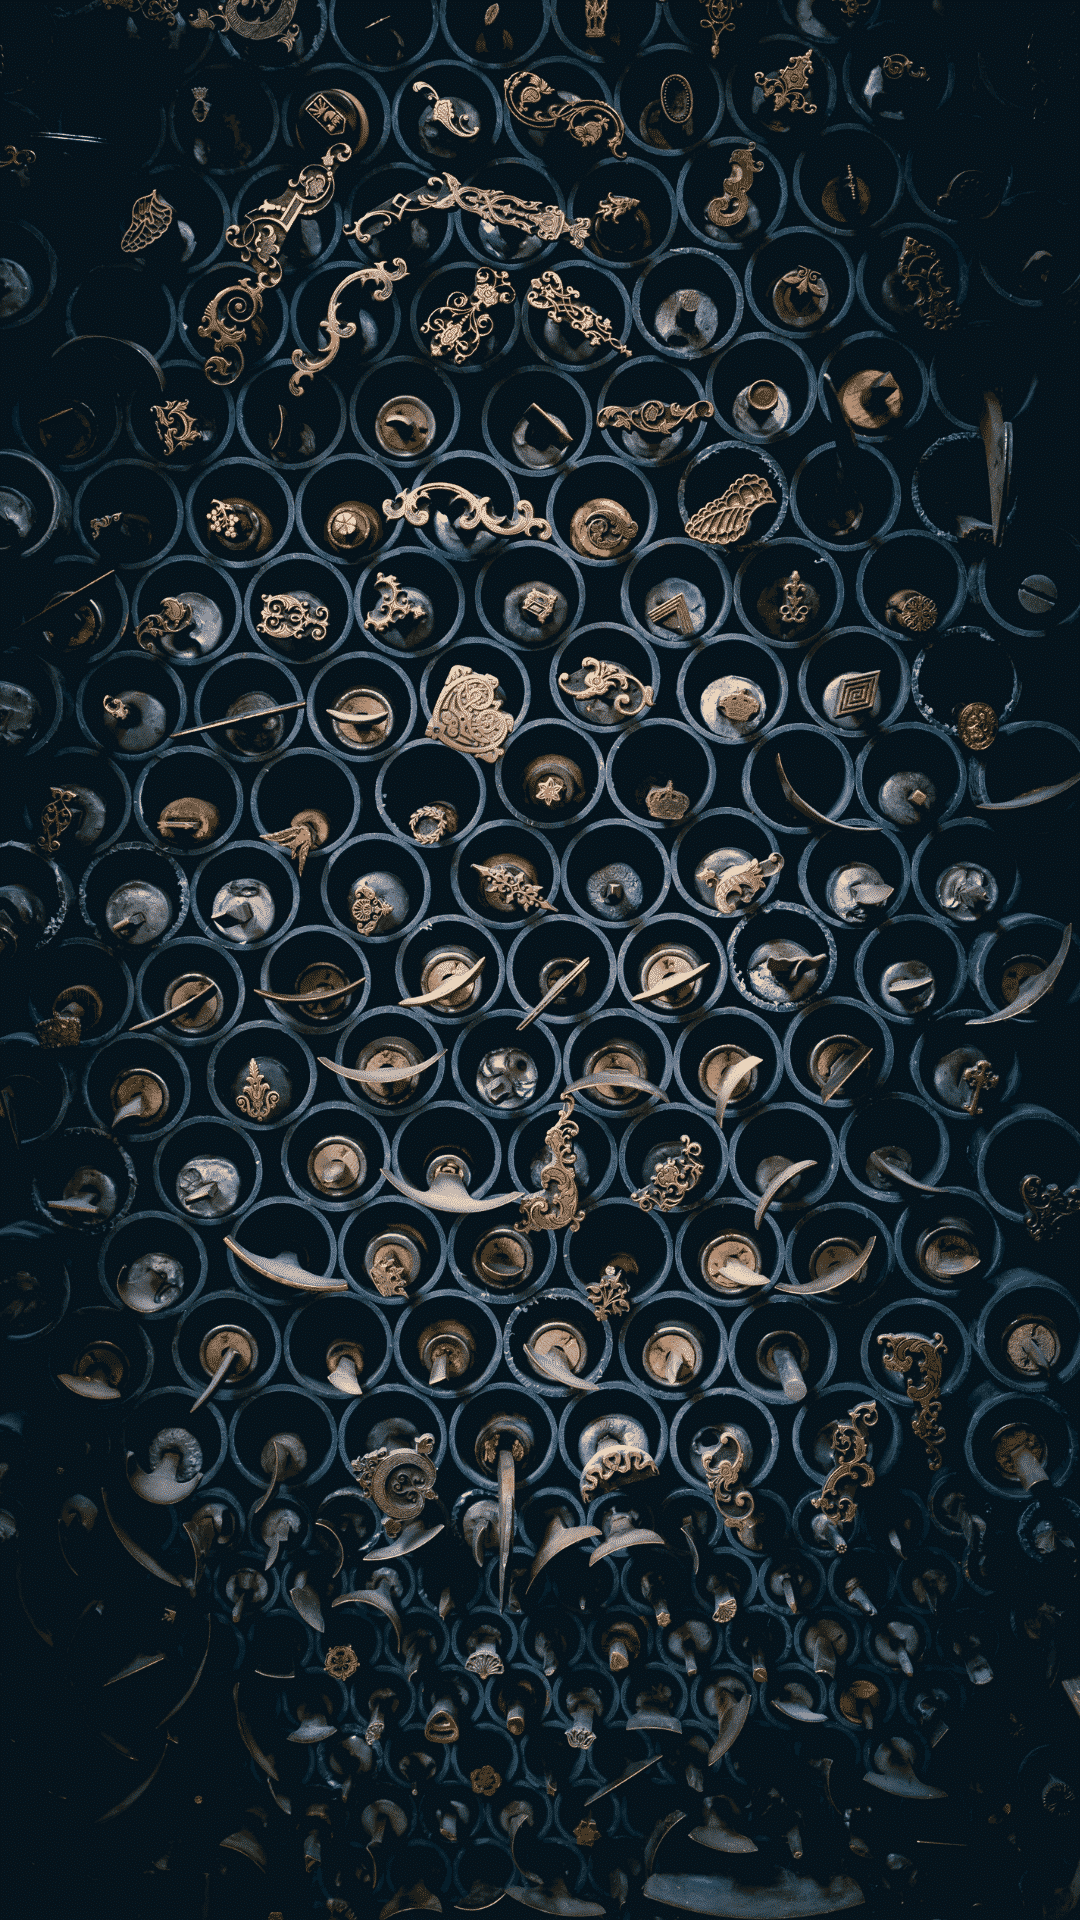 A dark image of a wall with many circular patterns and small metal objects. - Castle, Slytherin